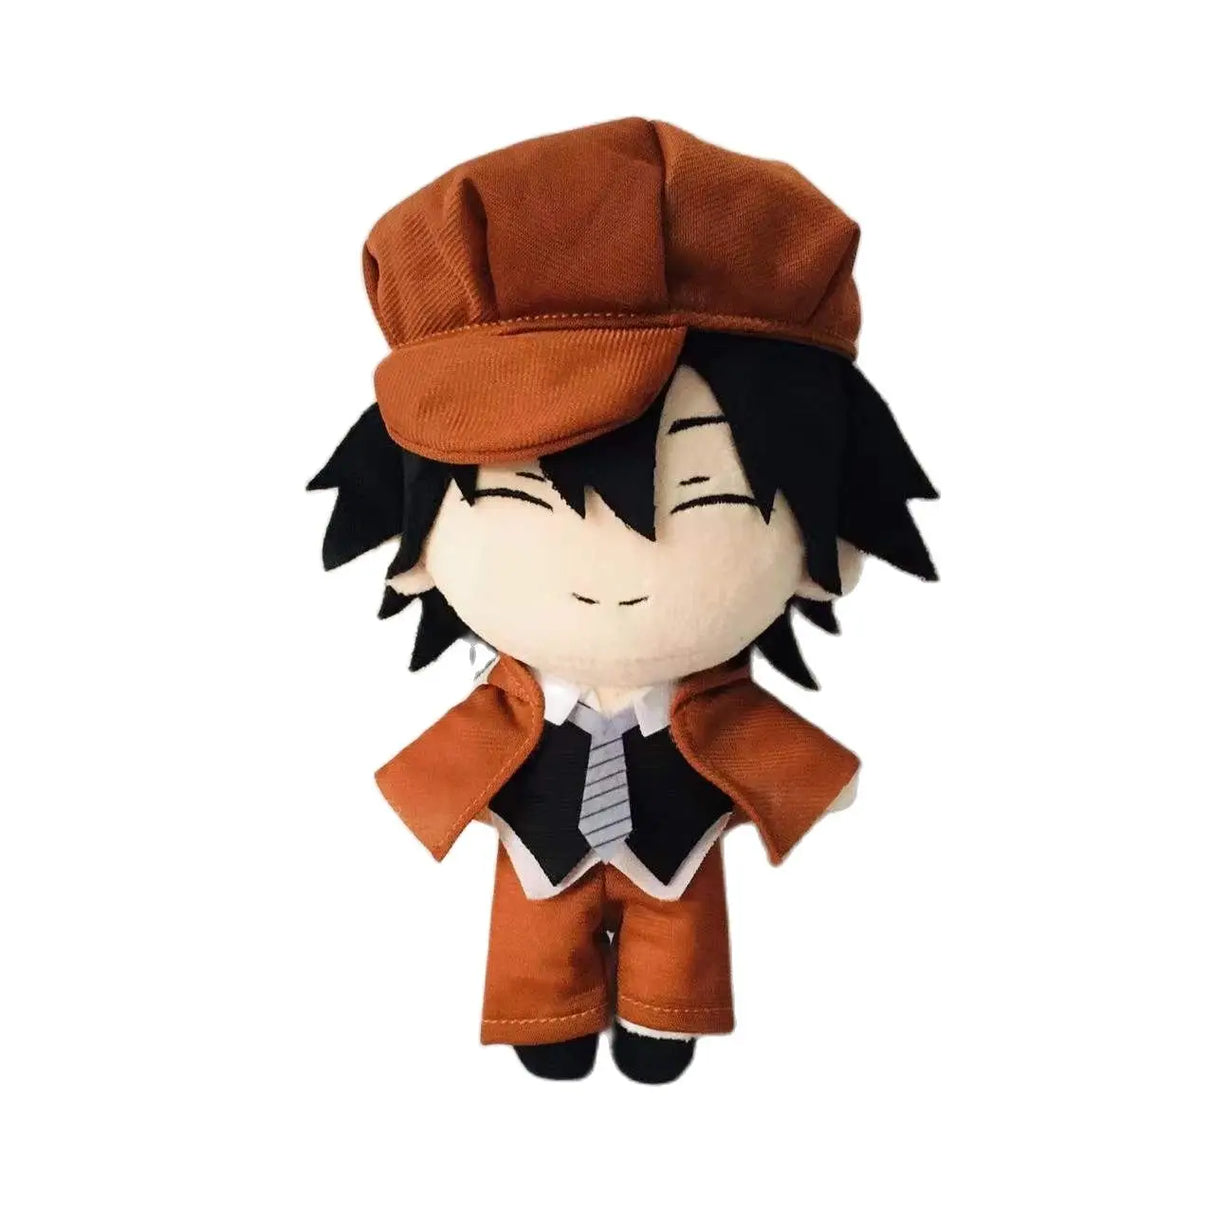 Collect them All! Each plush toy captures its distinctive styles and traits. | If you are looking for more Bungo Stray Dogs Merch, We have it all! | Check out all our Anime Merch now!